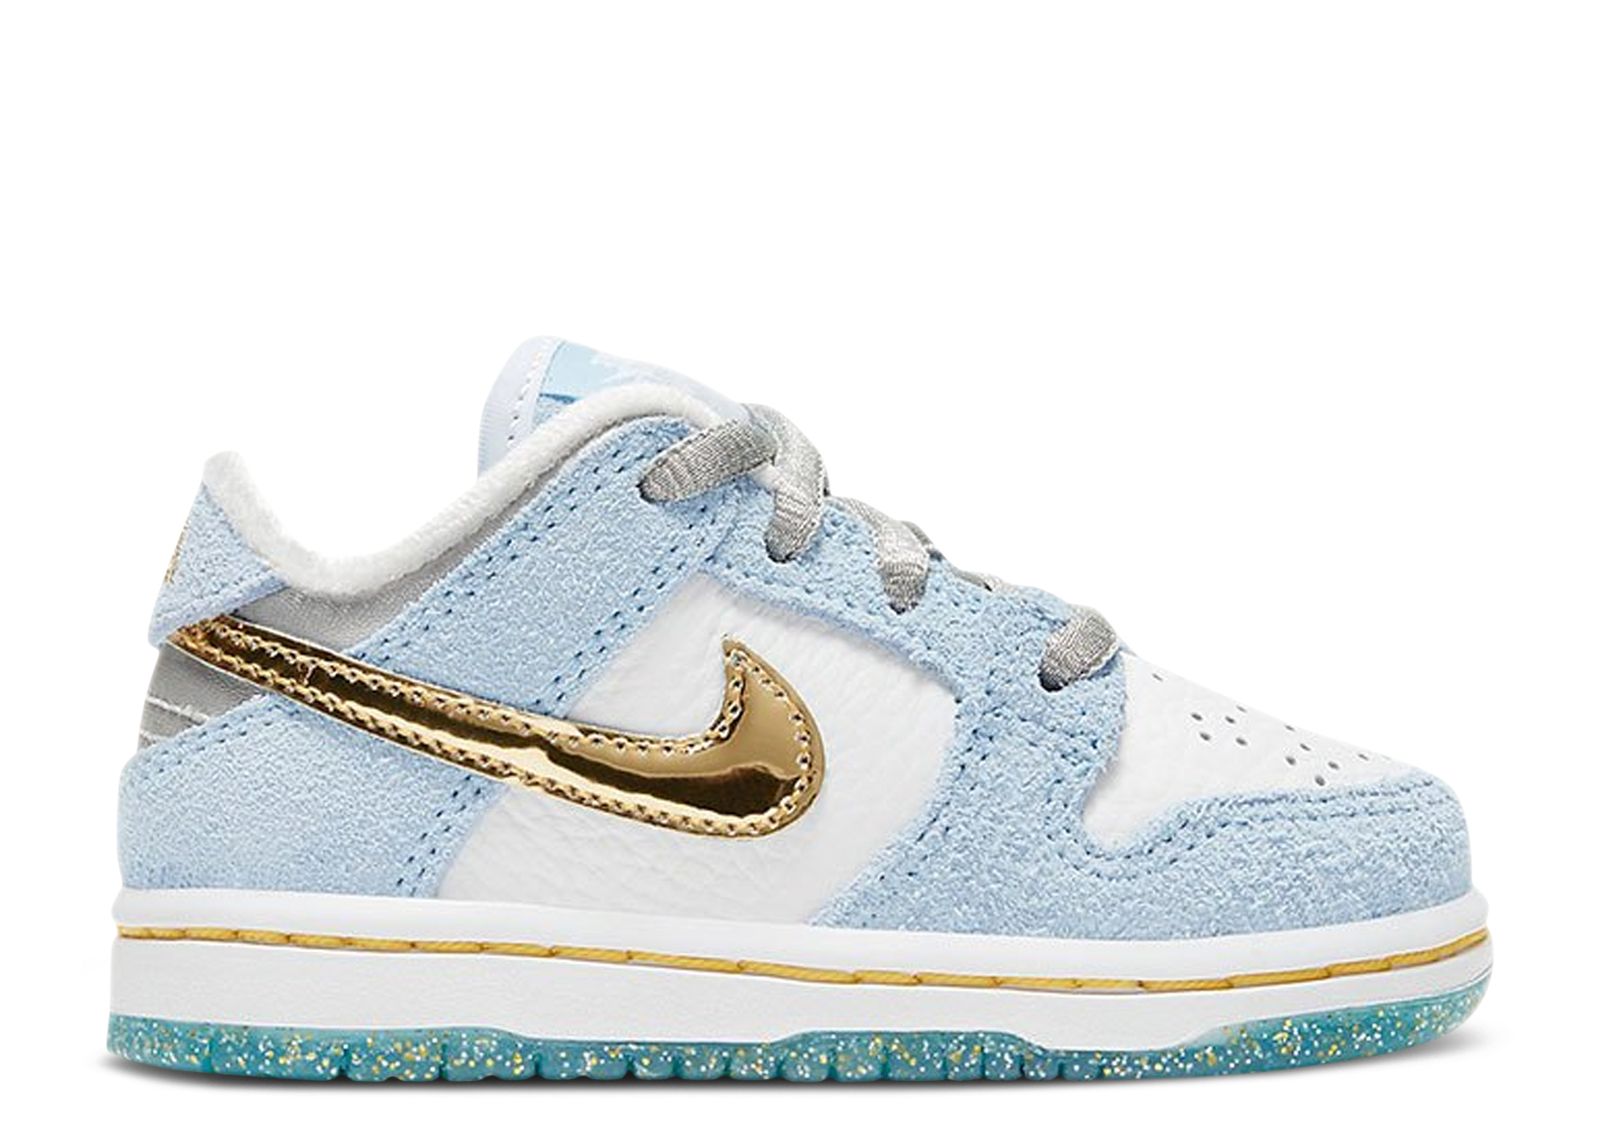 Sean Cliver x Dunk Low SB TD 'Holiday Special'